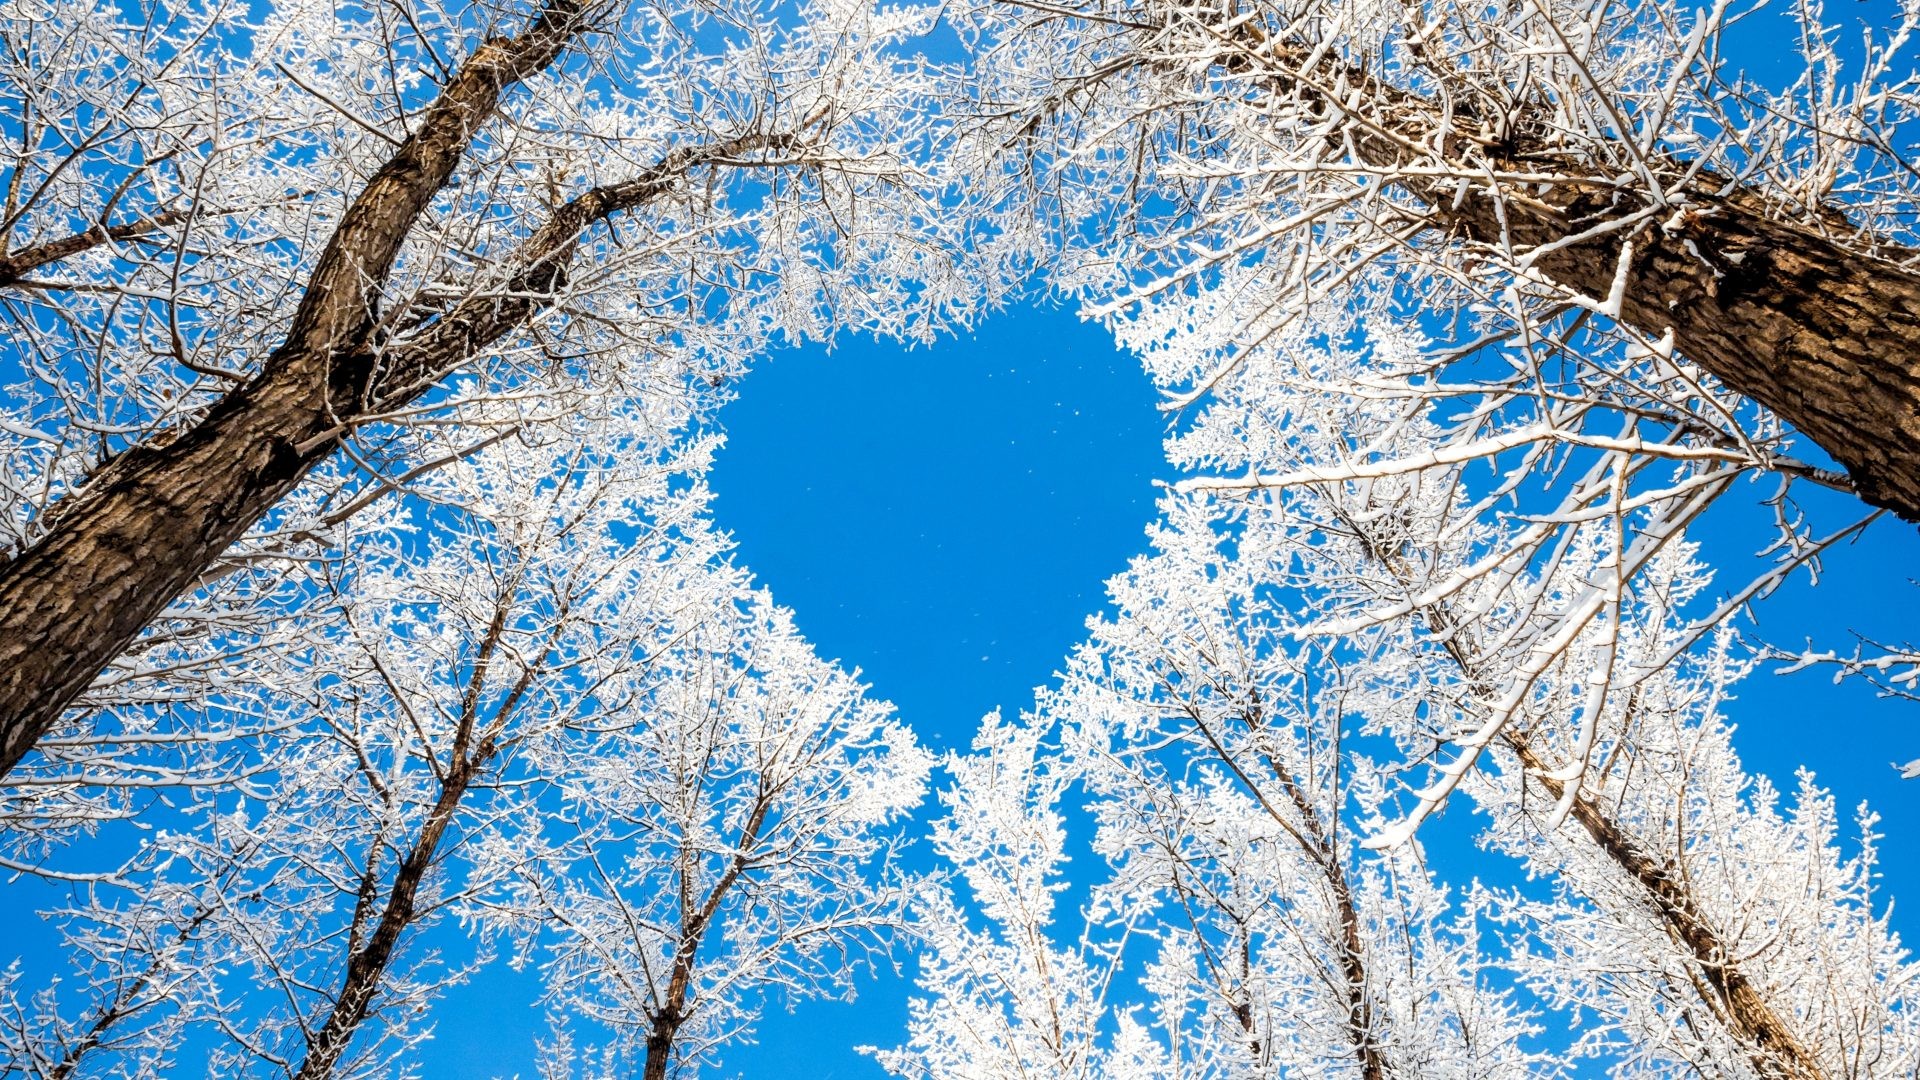 1920x1080 Trees Tree Nature Snow Heart Sky Winter Branches Love Awesome Hd Images.